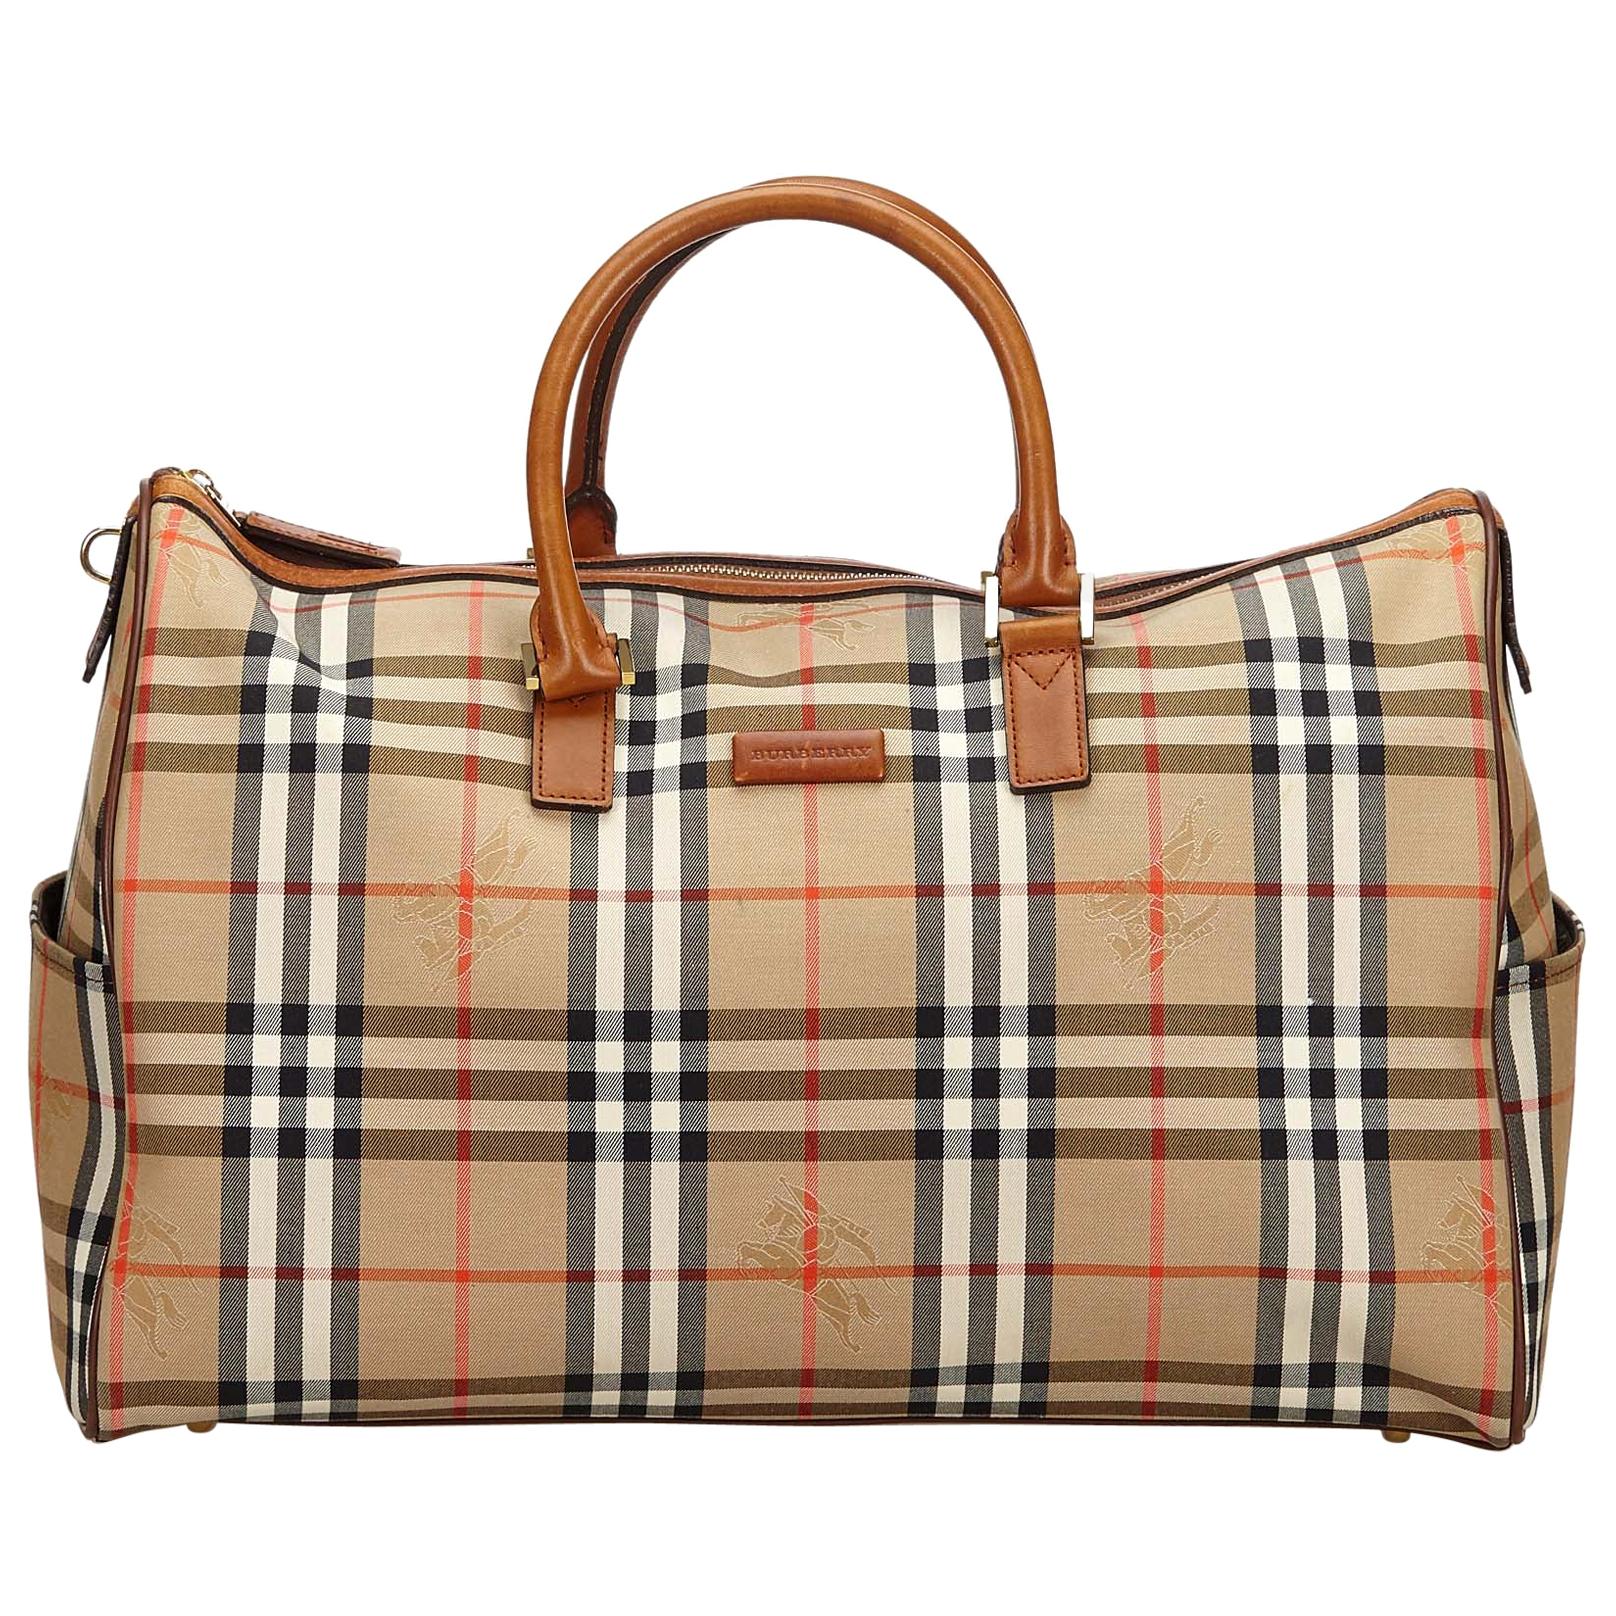 Genuine Burberry canvas and leather travel tote bag with leather strap